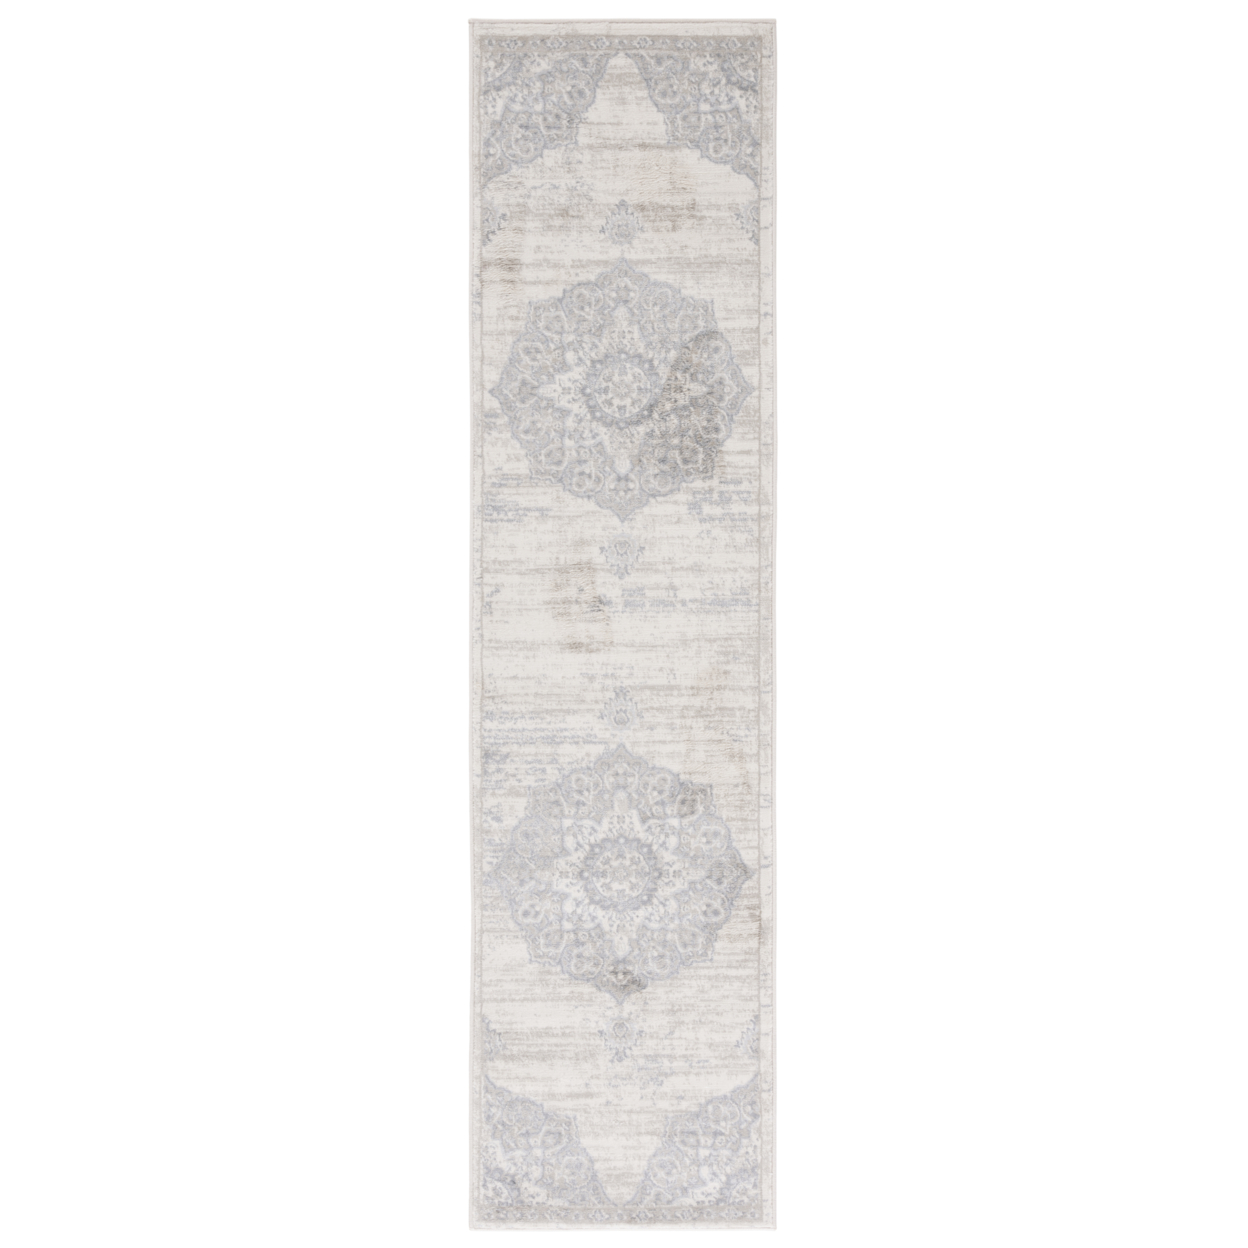 SAFAVIEH Brentwood Collection BNT802B Ivory / Beige Rug - 2' X 8'